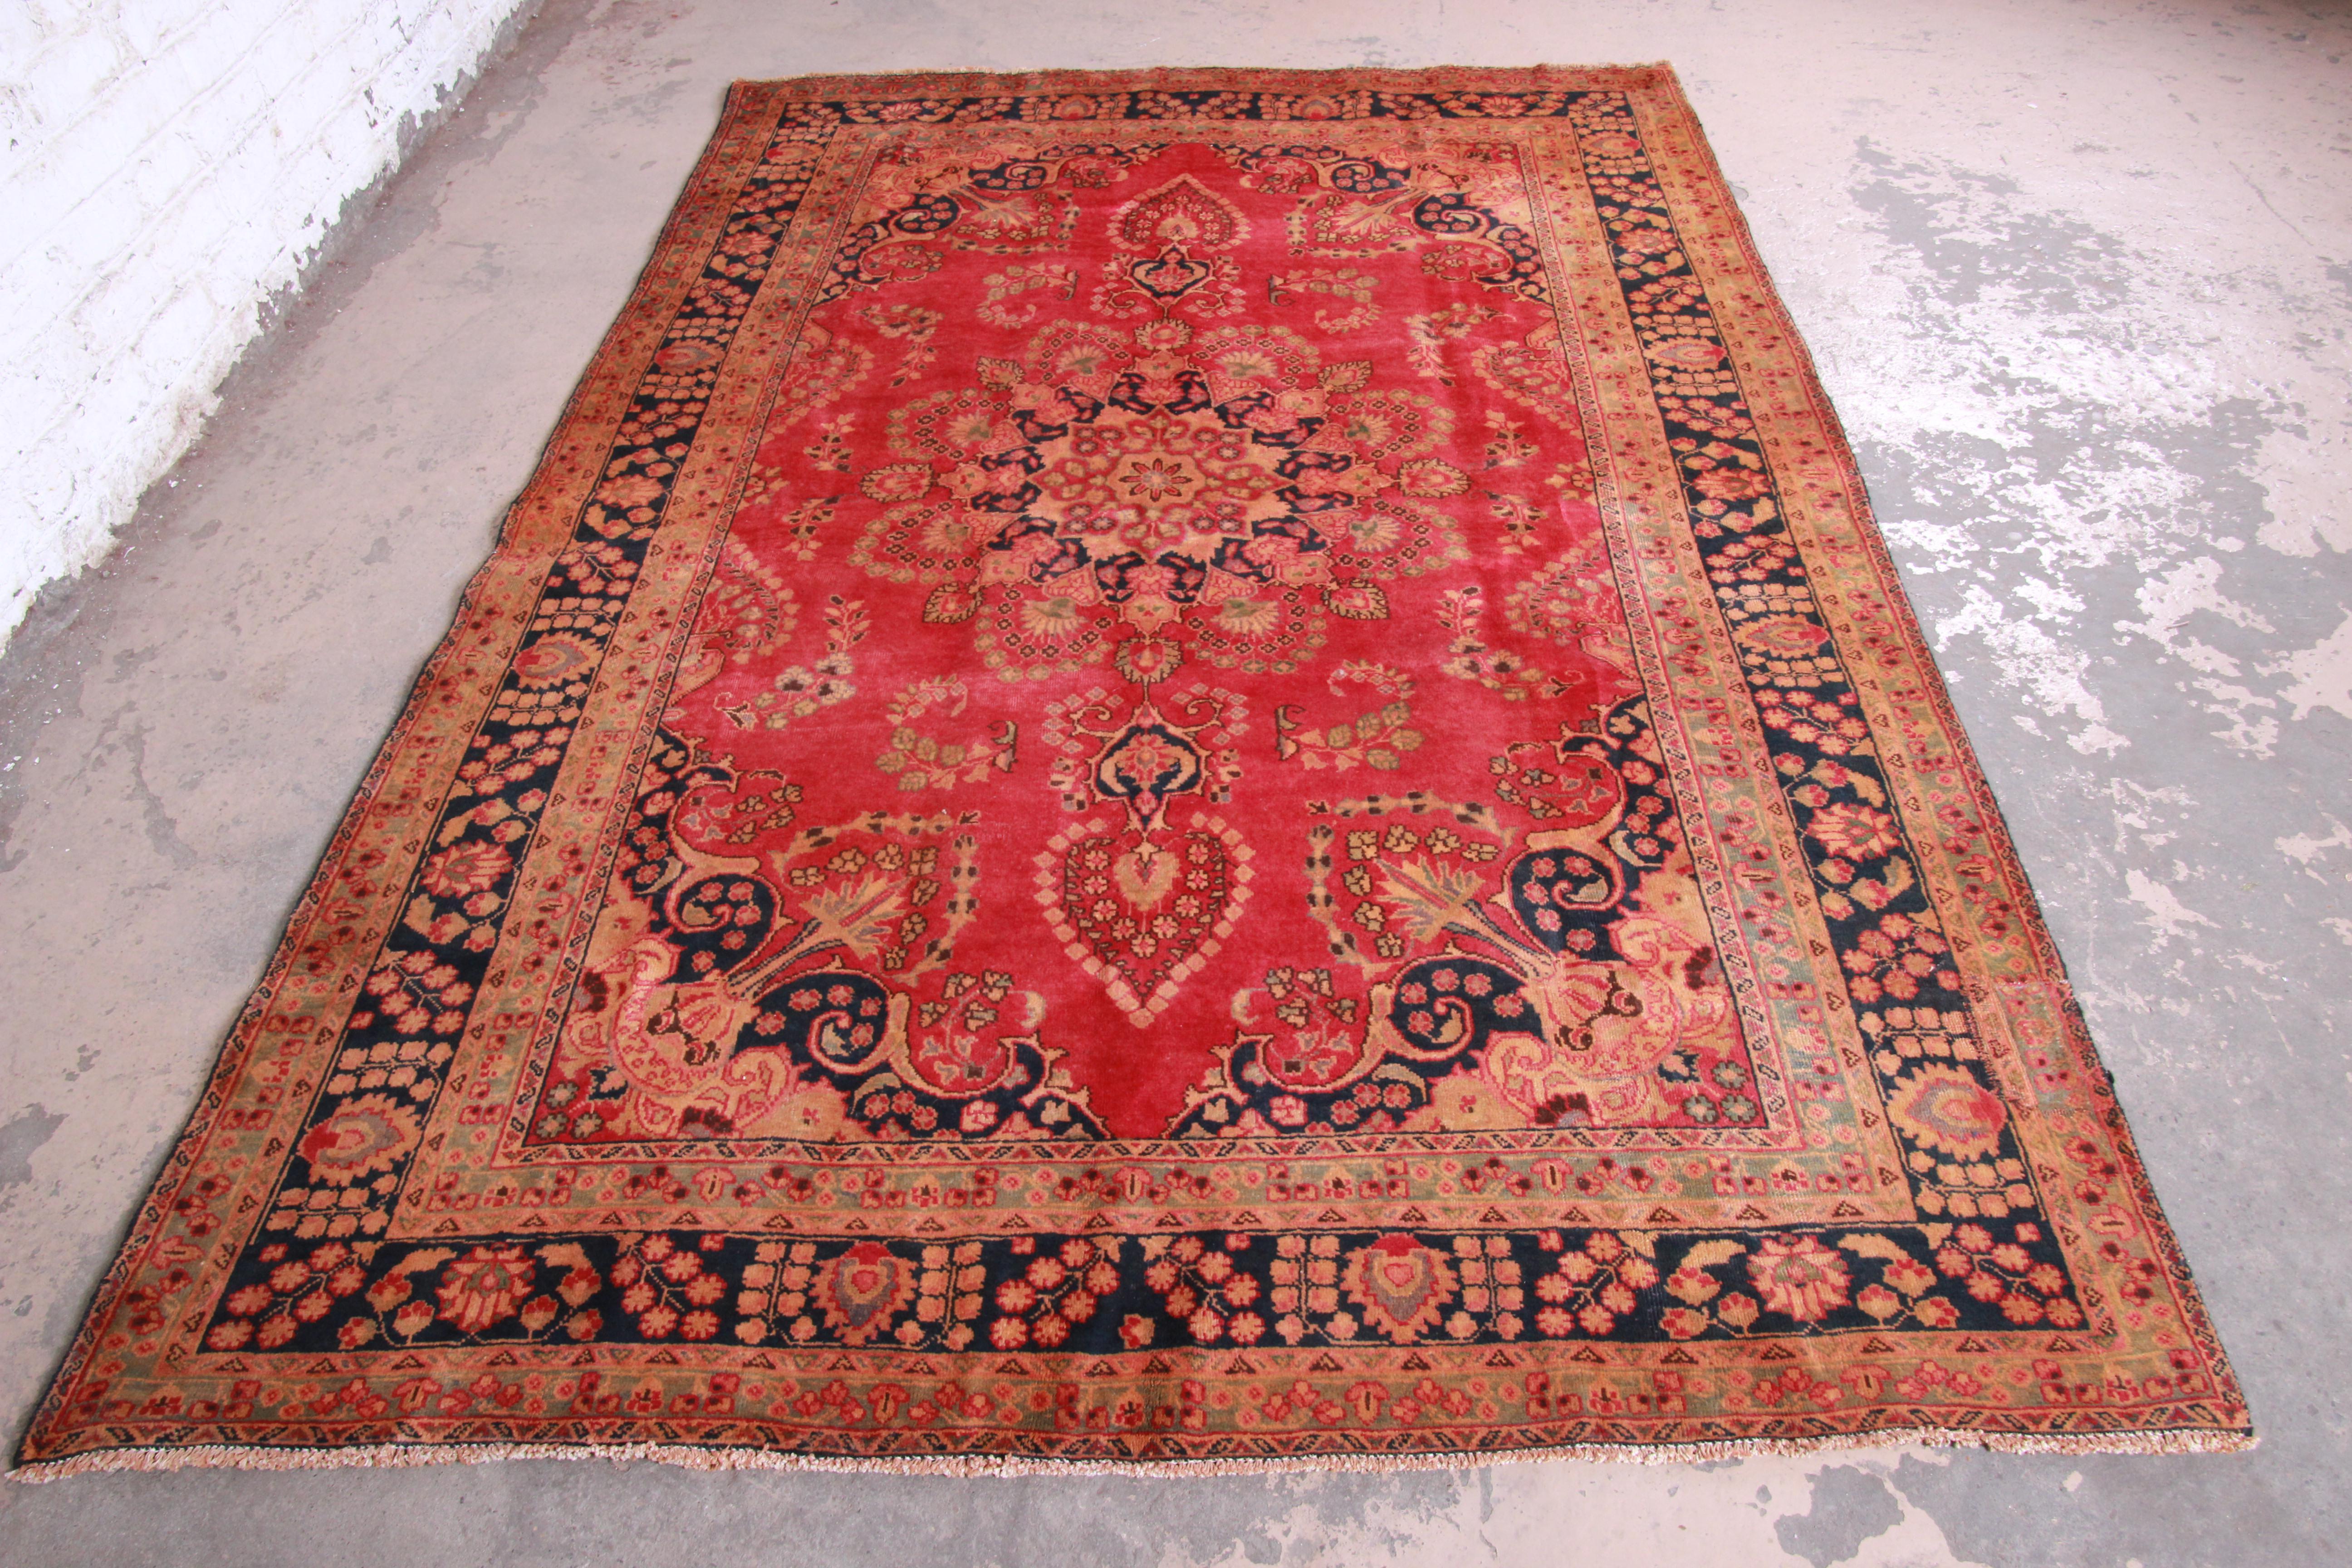 A gorgeous vintage handwoven Persian rug. The rug has a beautiful floral pattern with predominant colors in red, blue, green, and gold. The rug is clean and in very good condition, with very minor wear from age and use.

The rug measures 75